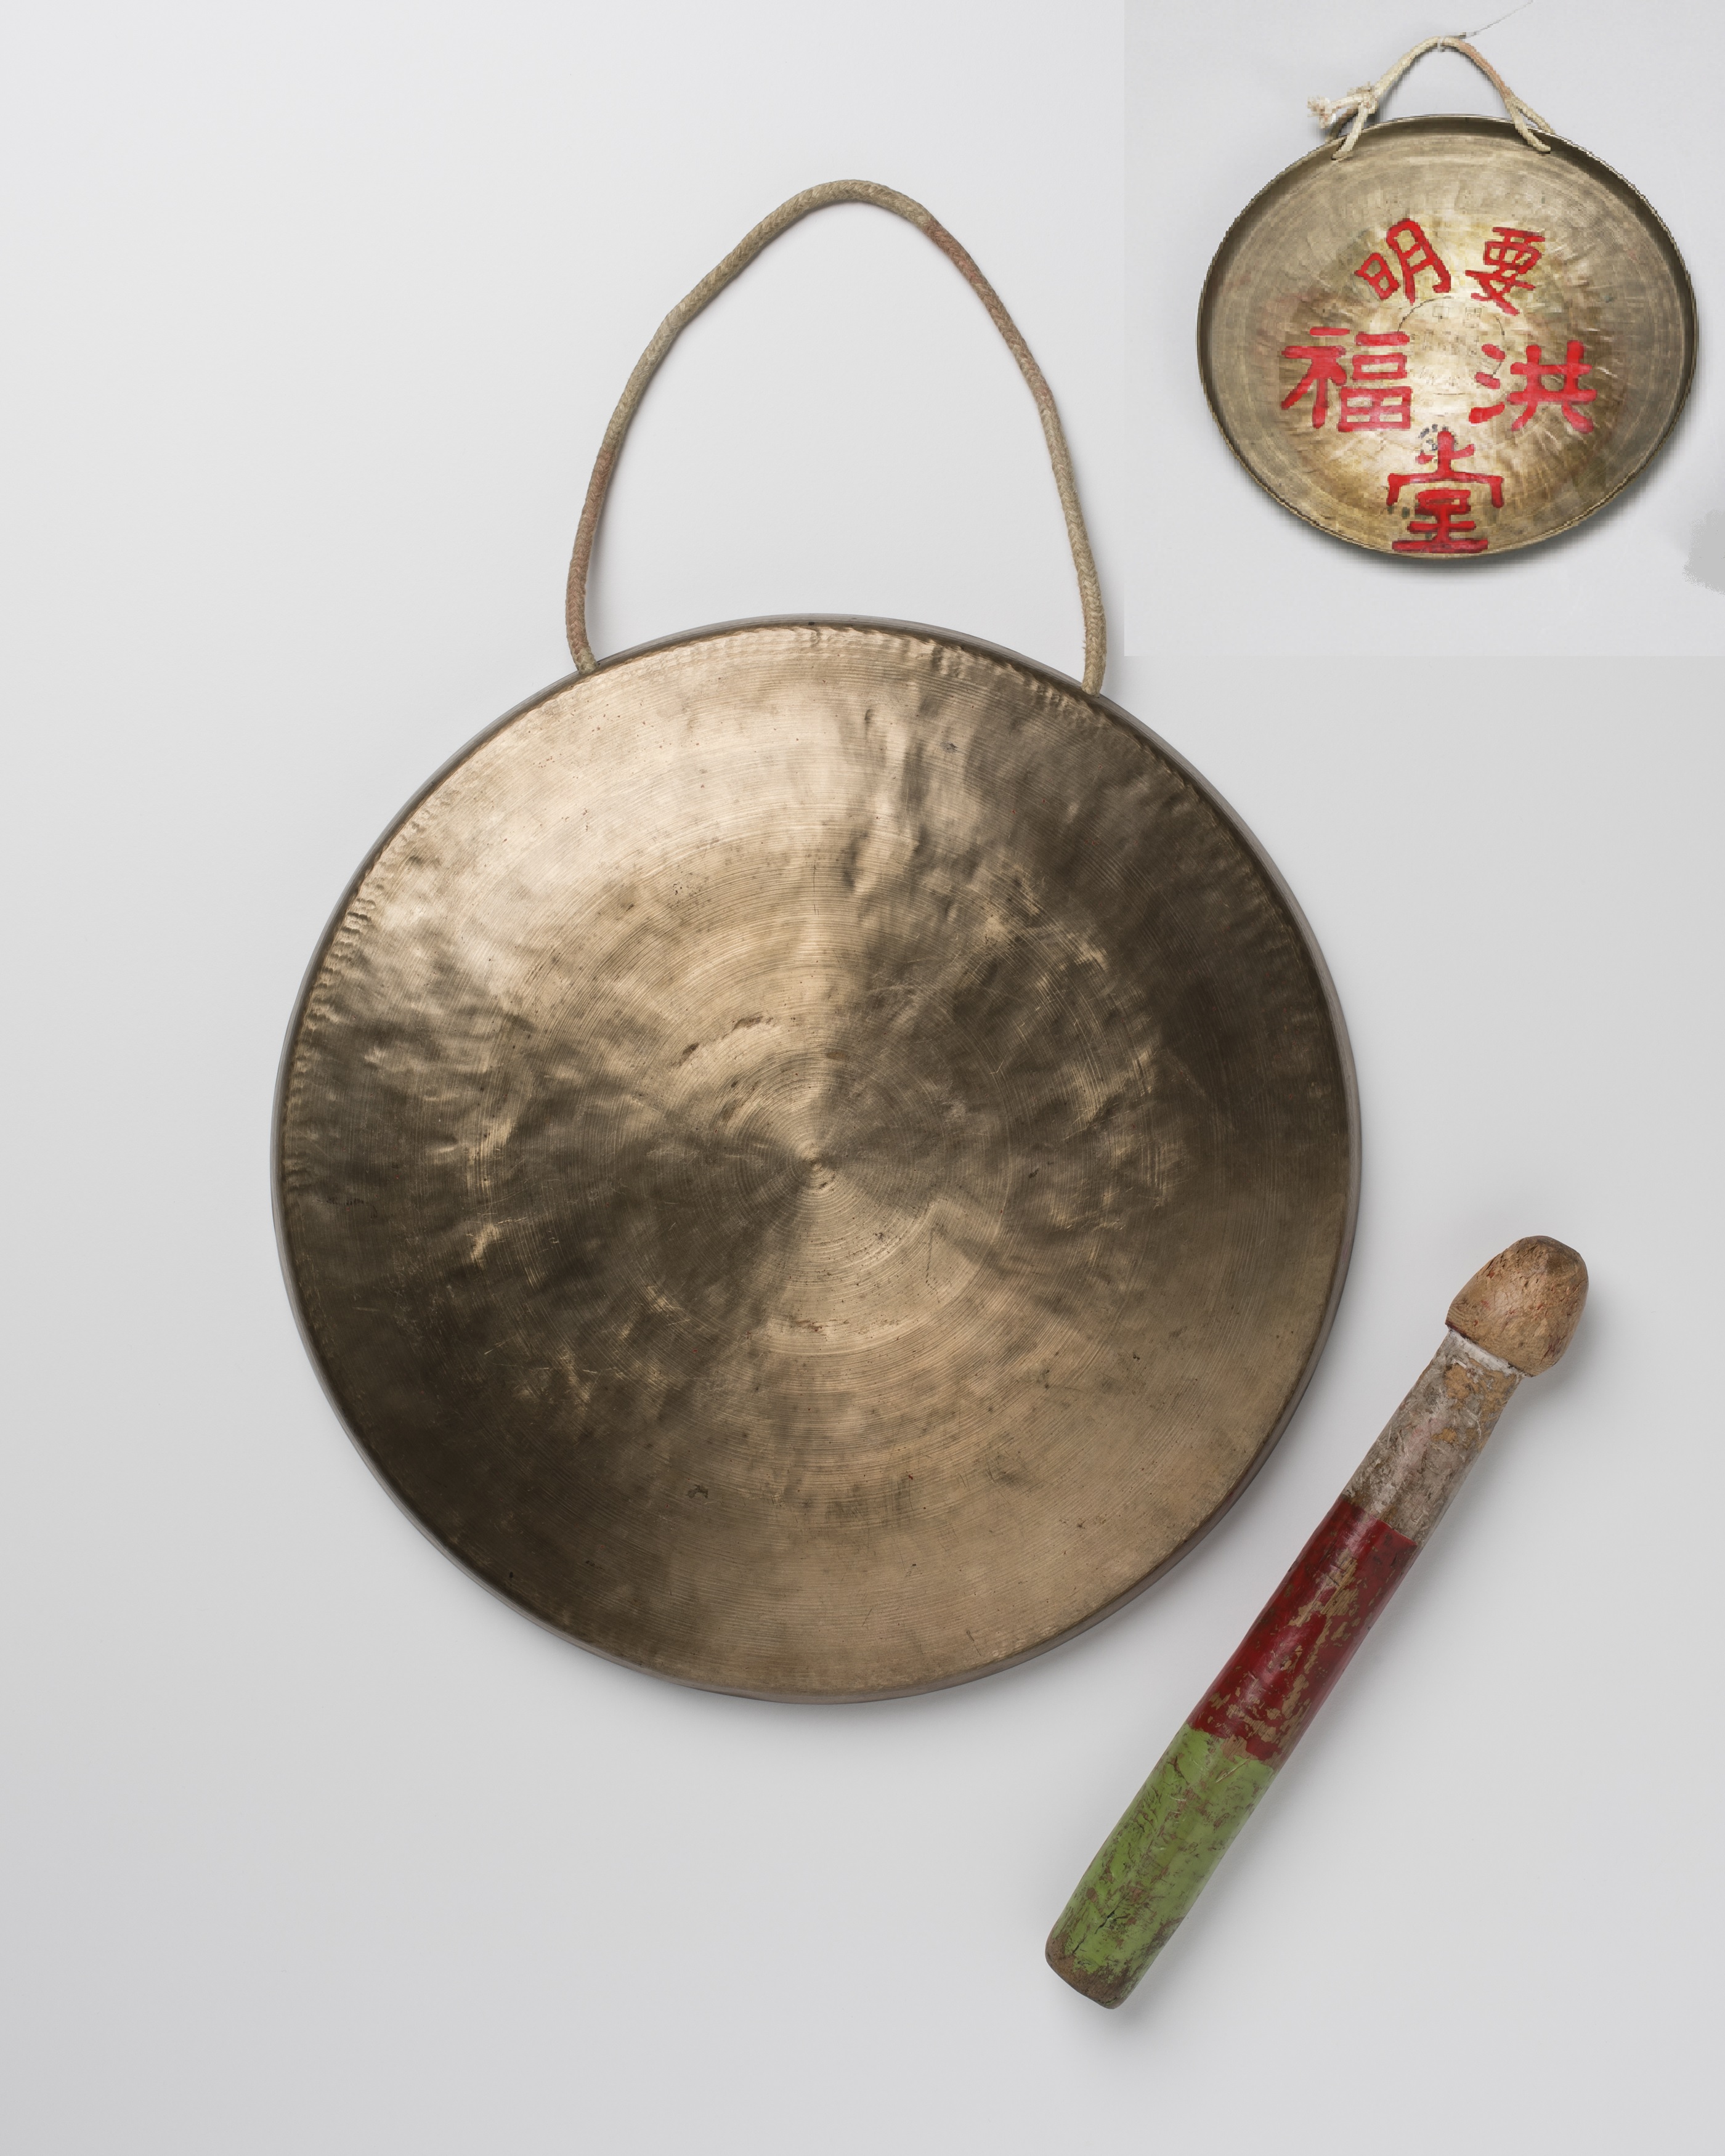 An image of a circular brass gong with cotton cord handle attached with its painted wooden beater to the side. A small image of the reverse of the gong with Chinese characters in red is in the top right corner of the image.